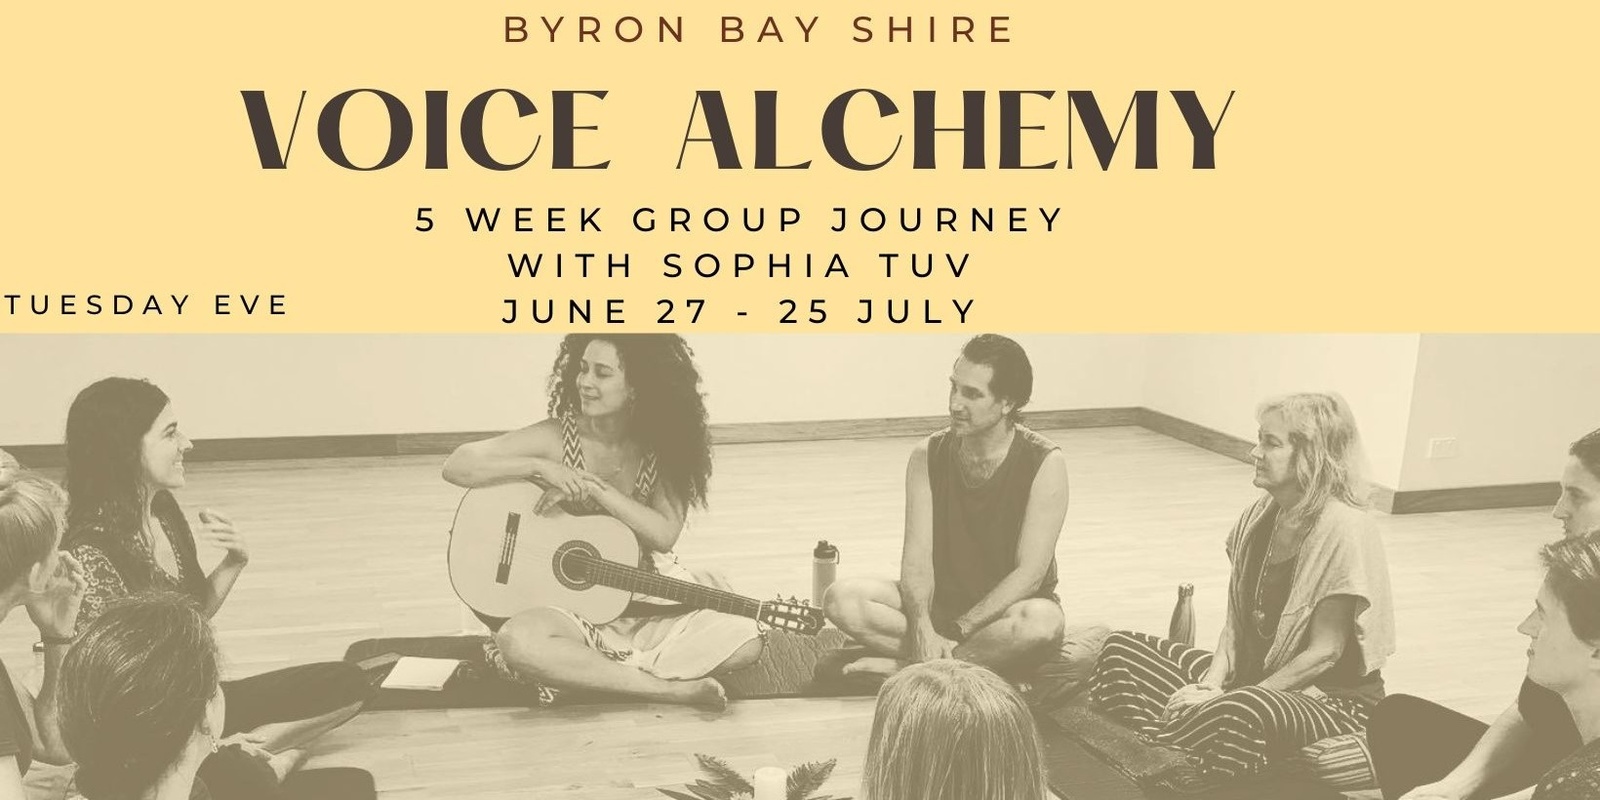 Banner image for VOICE ALCHEMY - 5 WEEK GROUP JOURNEY - BYRON BAY INDUSTRIAL  - 27 JUNE - 25 JULY -TUESDAYS